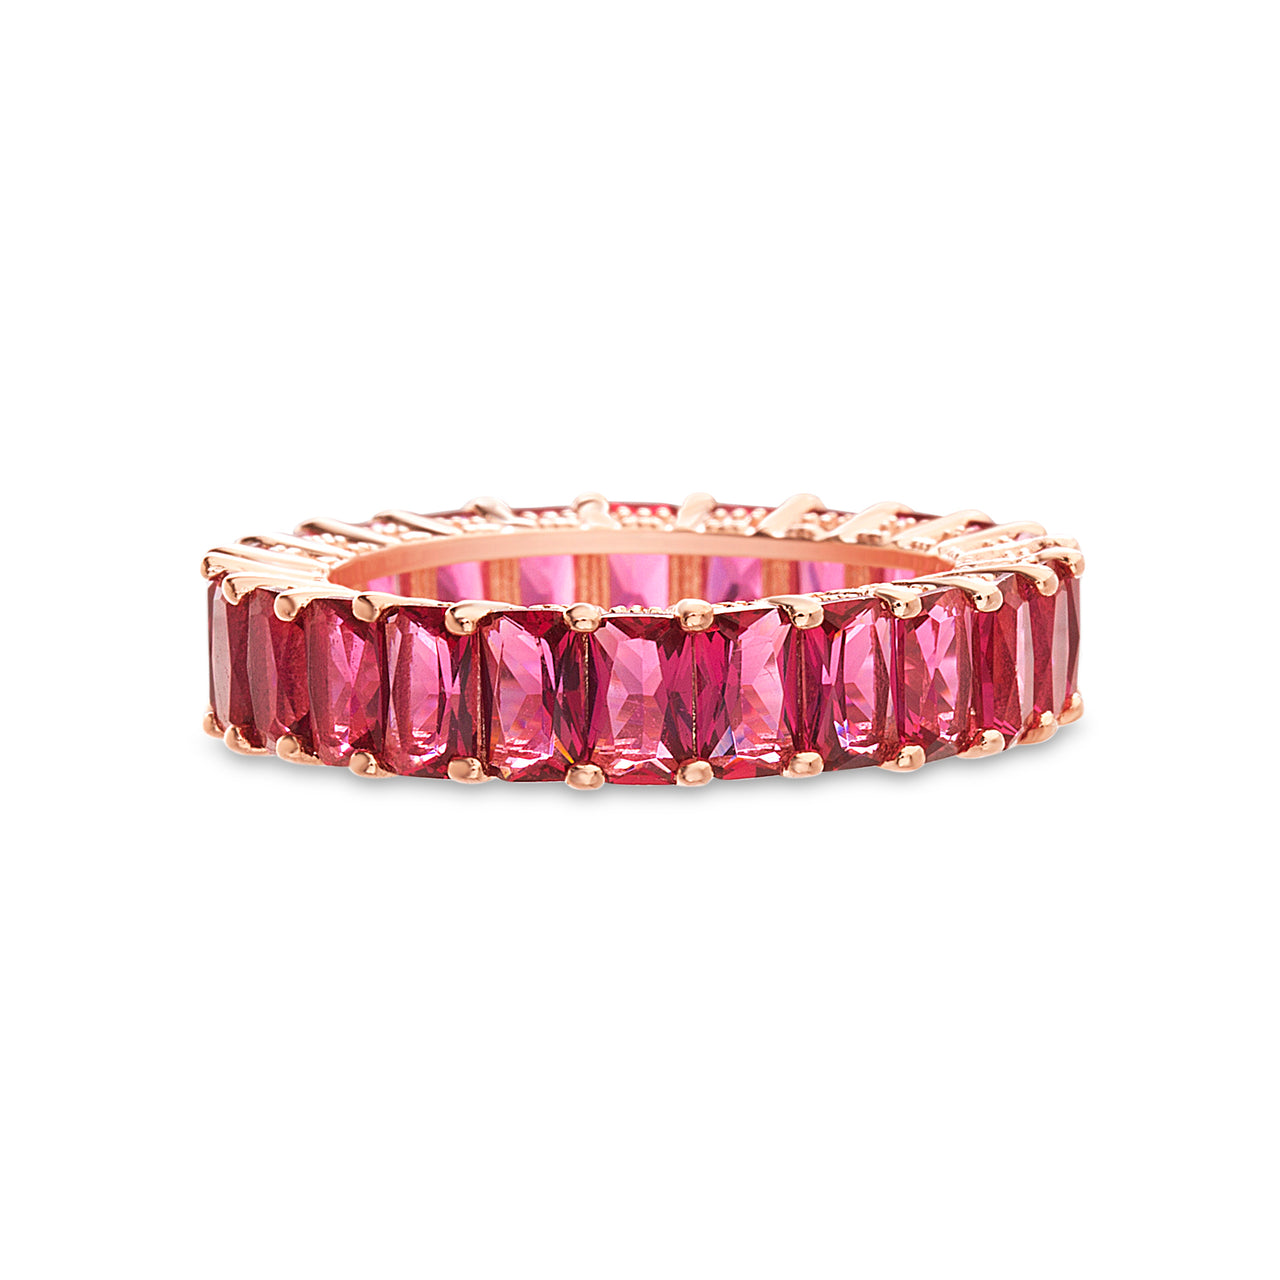 Lesa Michele Simulated Ruby Cubic Zirconia Emerald Cut Eternity Band Ring in Rose Gold Plated Sterling Silver